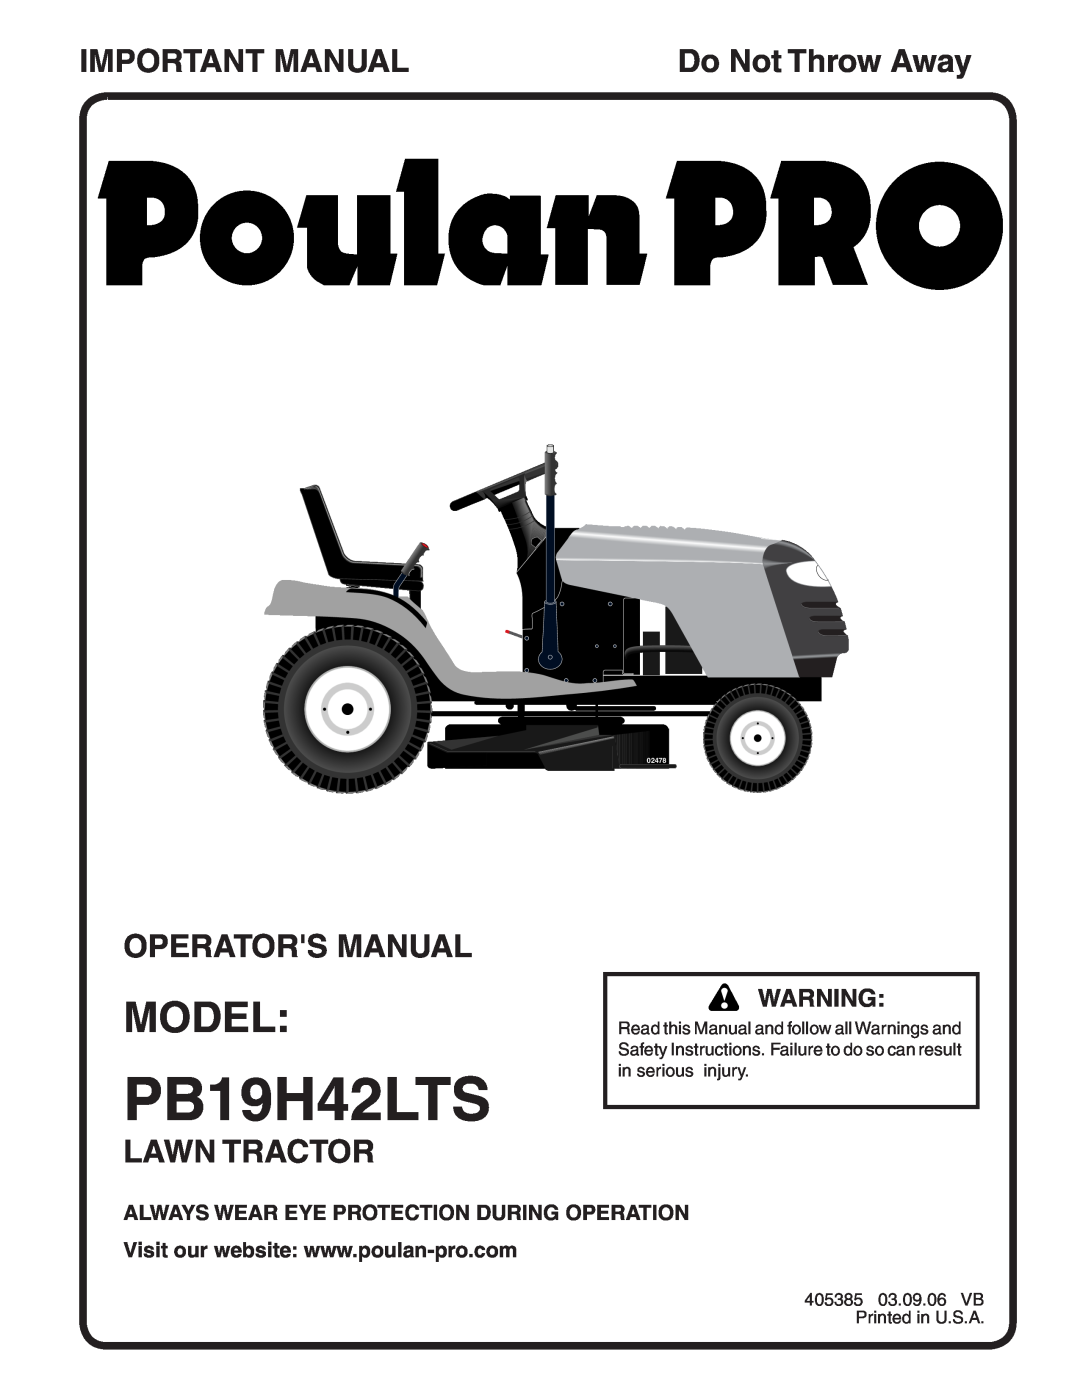 Poulan 405385 manual Model, Important Manual, Operators Manual, Lawn Tractor, Always Wear Eye Protection During Operation 